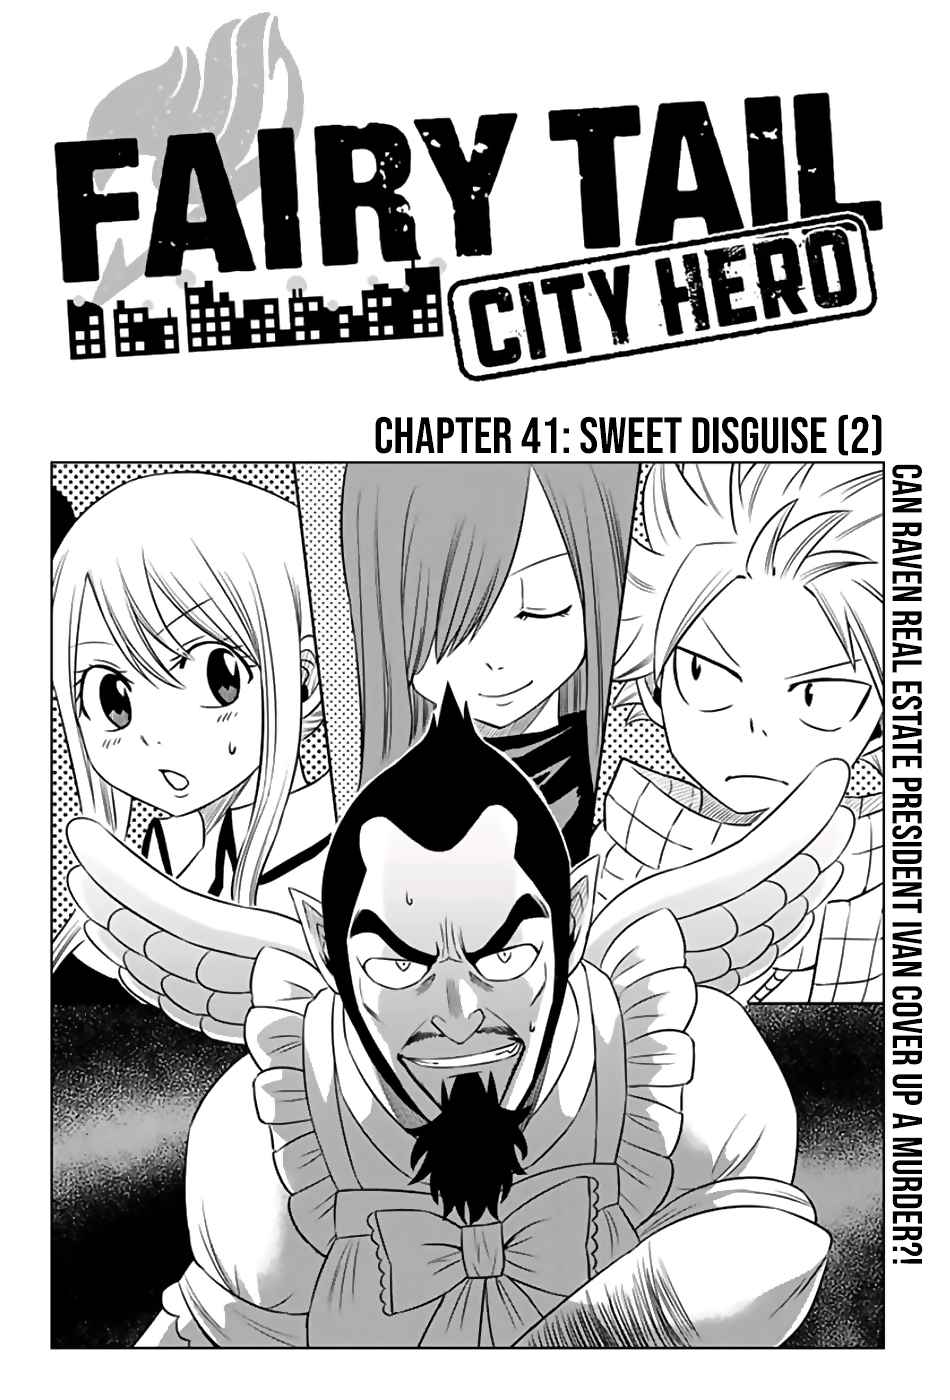 Fairy Tail: City Hero Ch. 41 Sweet Disguise 2